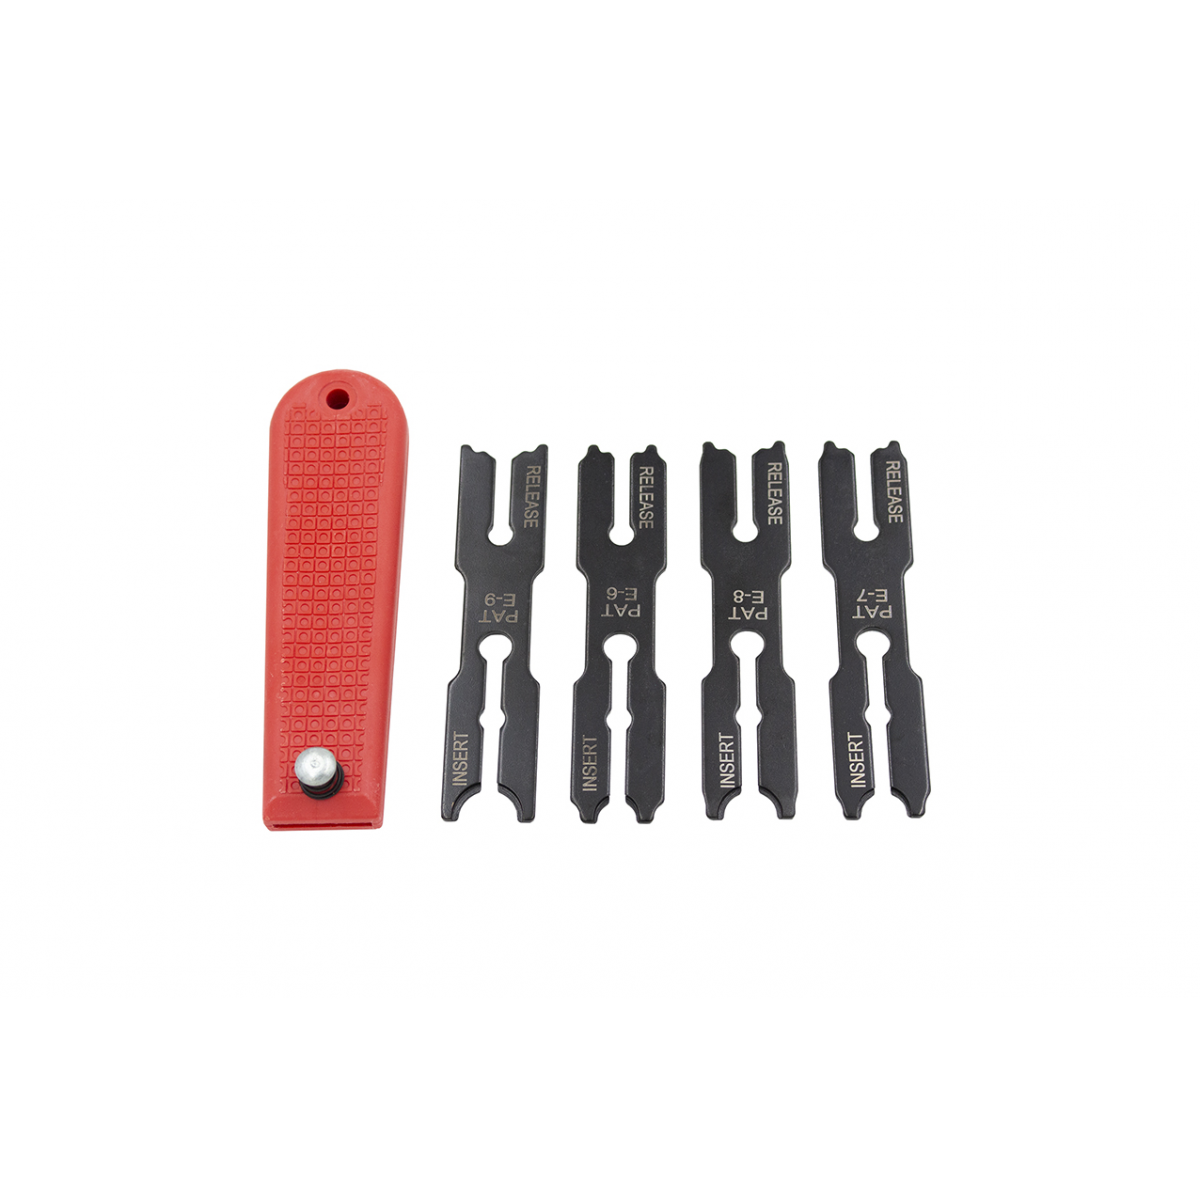 E-Clip Fastener Remover and Installer Tool Set For E Clips 6mm - 9mm 5pc Set